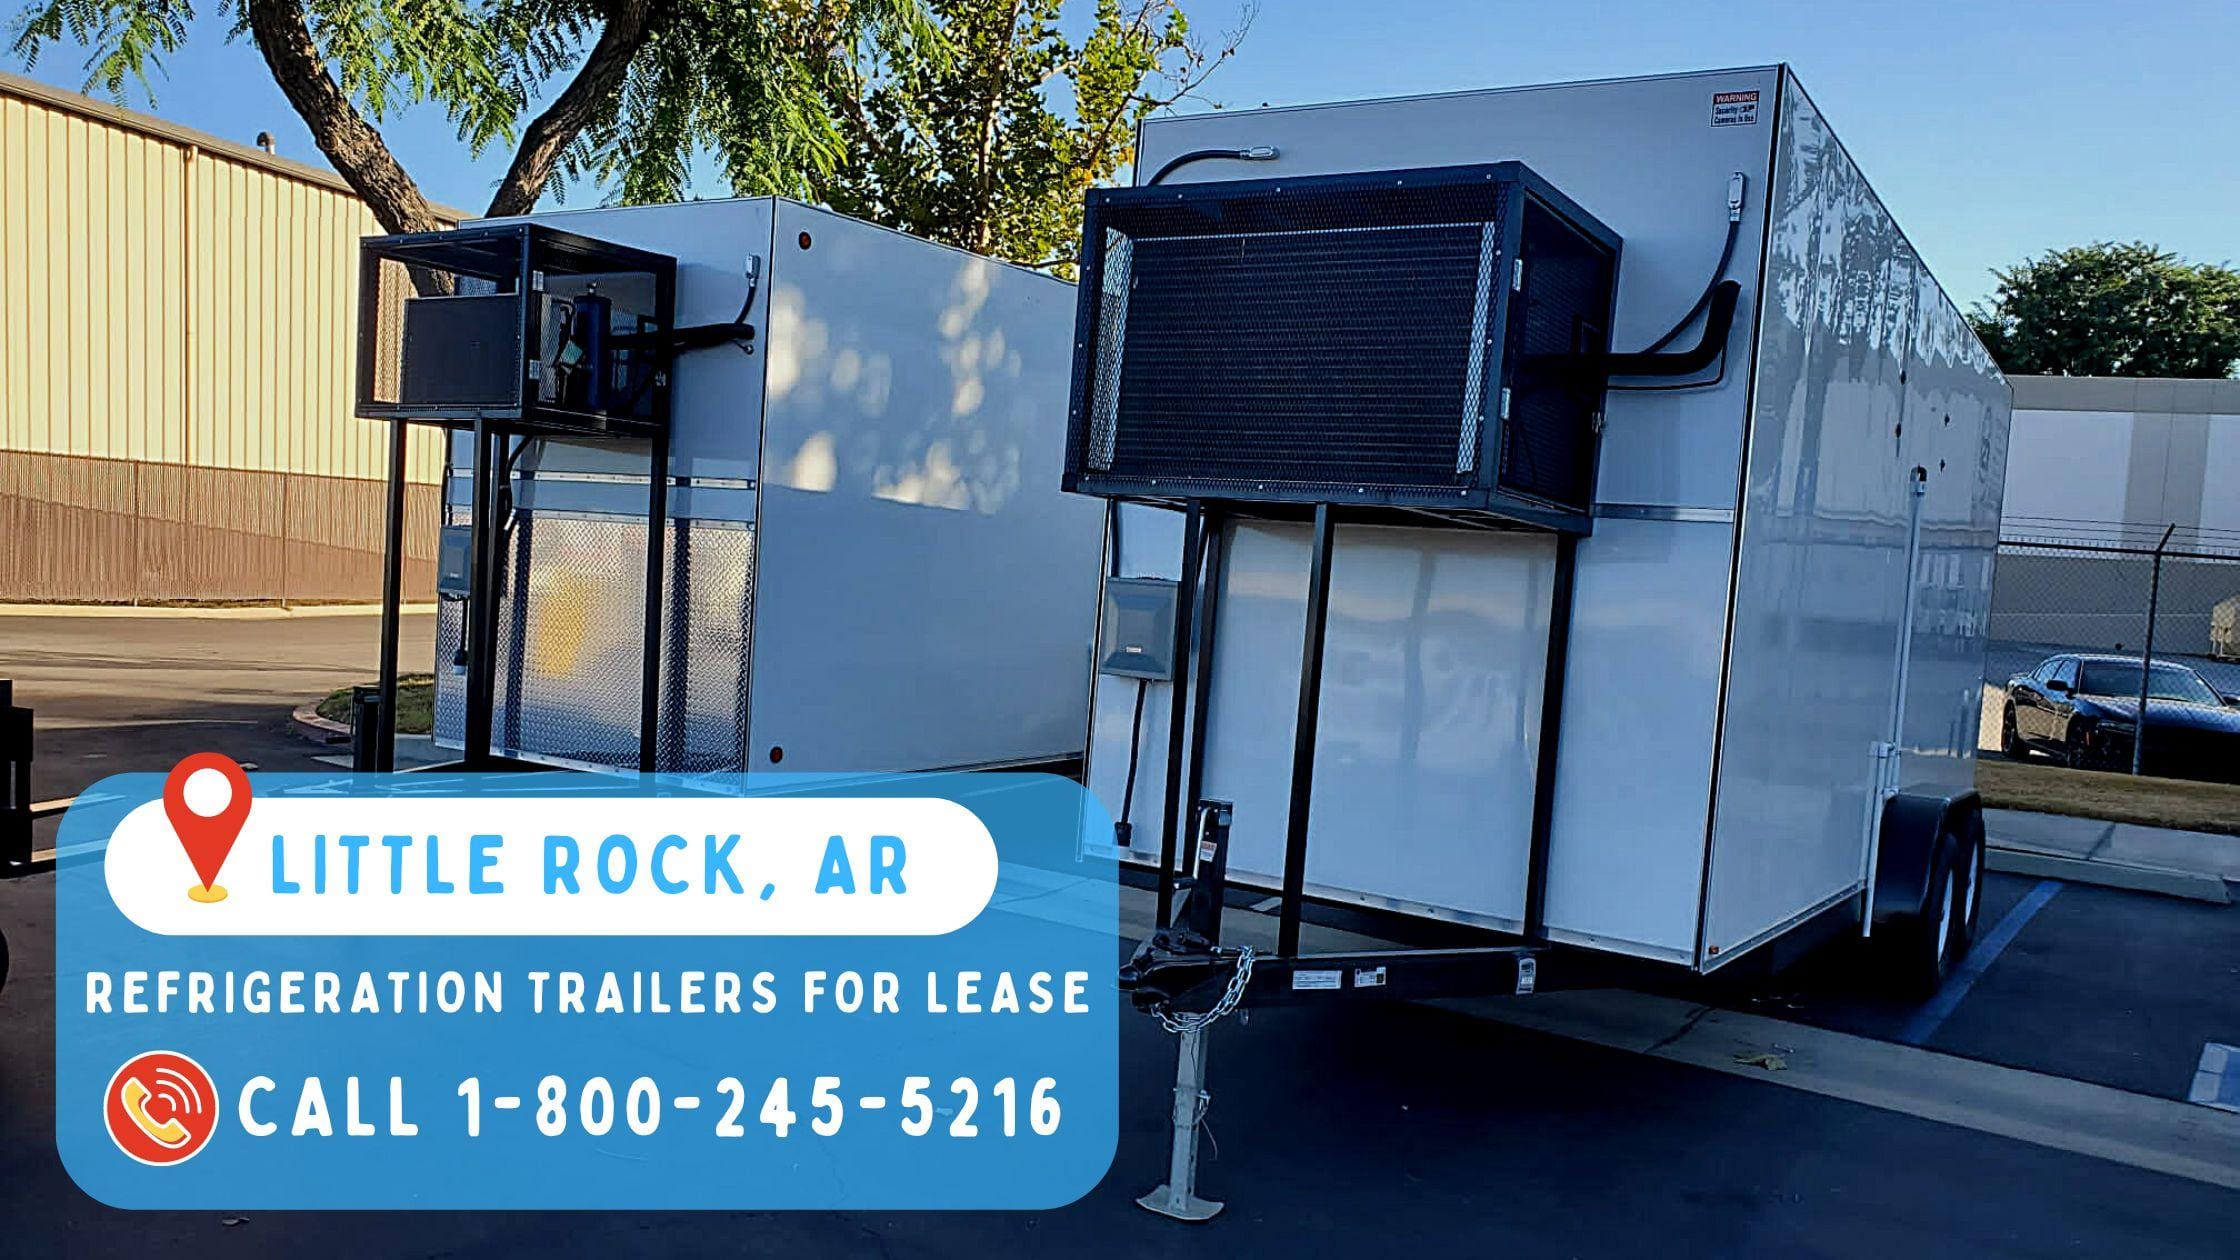 Refrigeration Trailers for Lease in Little Rock, AR